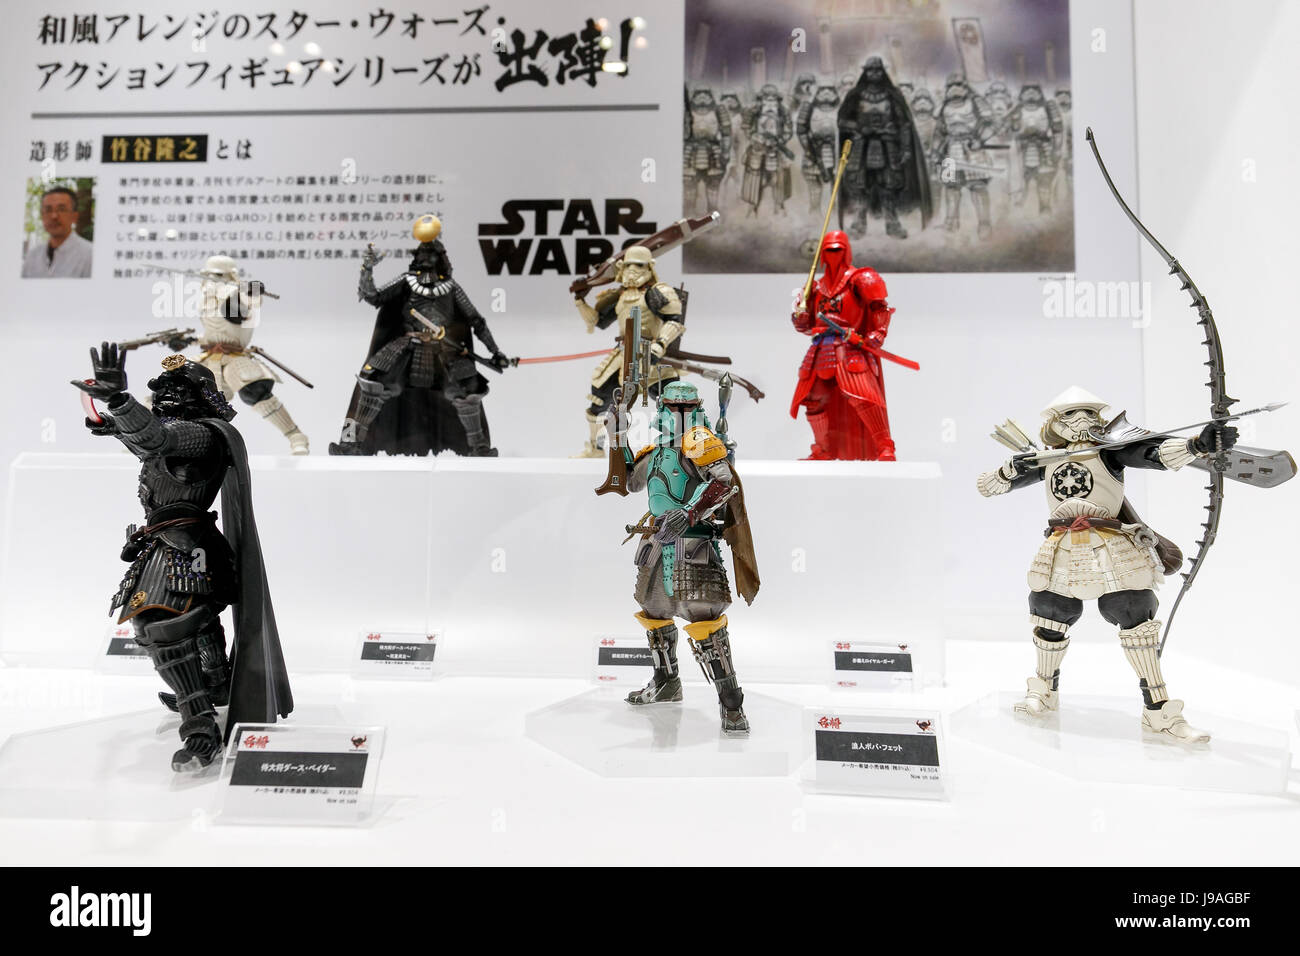 Star Wars' Samurai action figures on display at the International Tokyo Toy  Show 2017 in Tokyo Big Sight on June 1, 2017, Tokyo, Japan. Japan's biggest  exhibition for the toy industry showcases